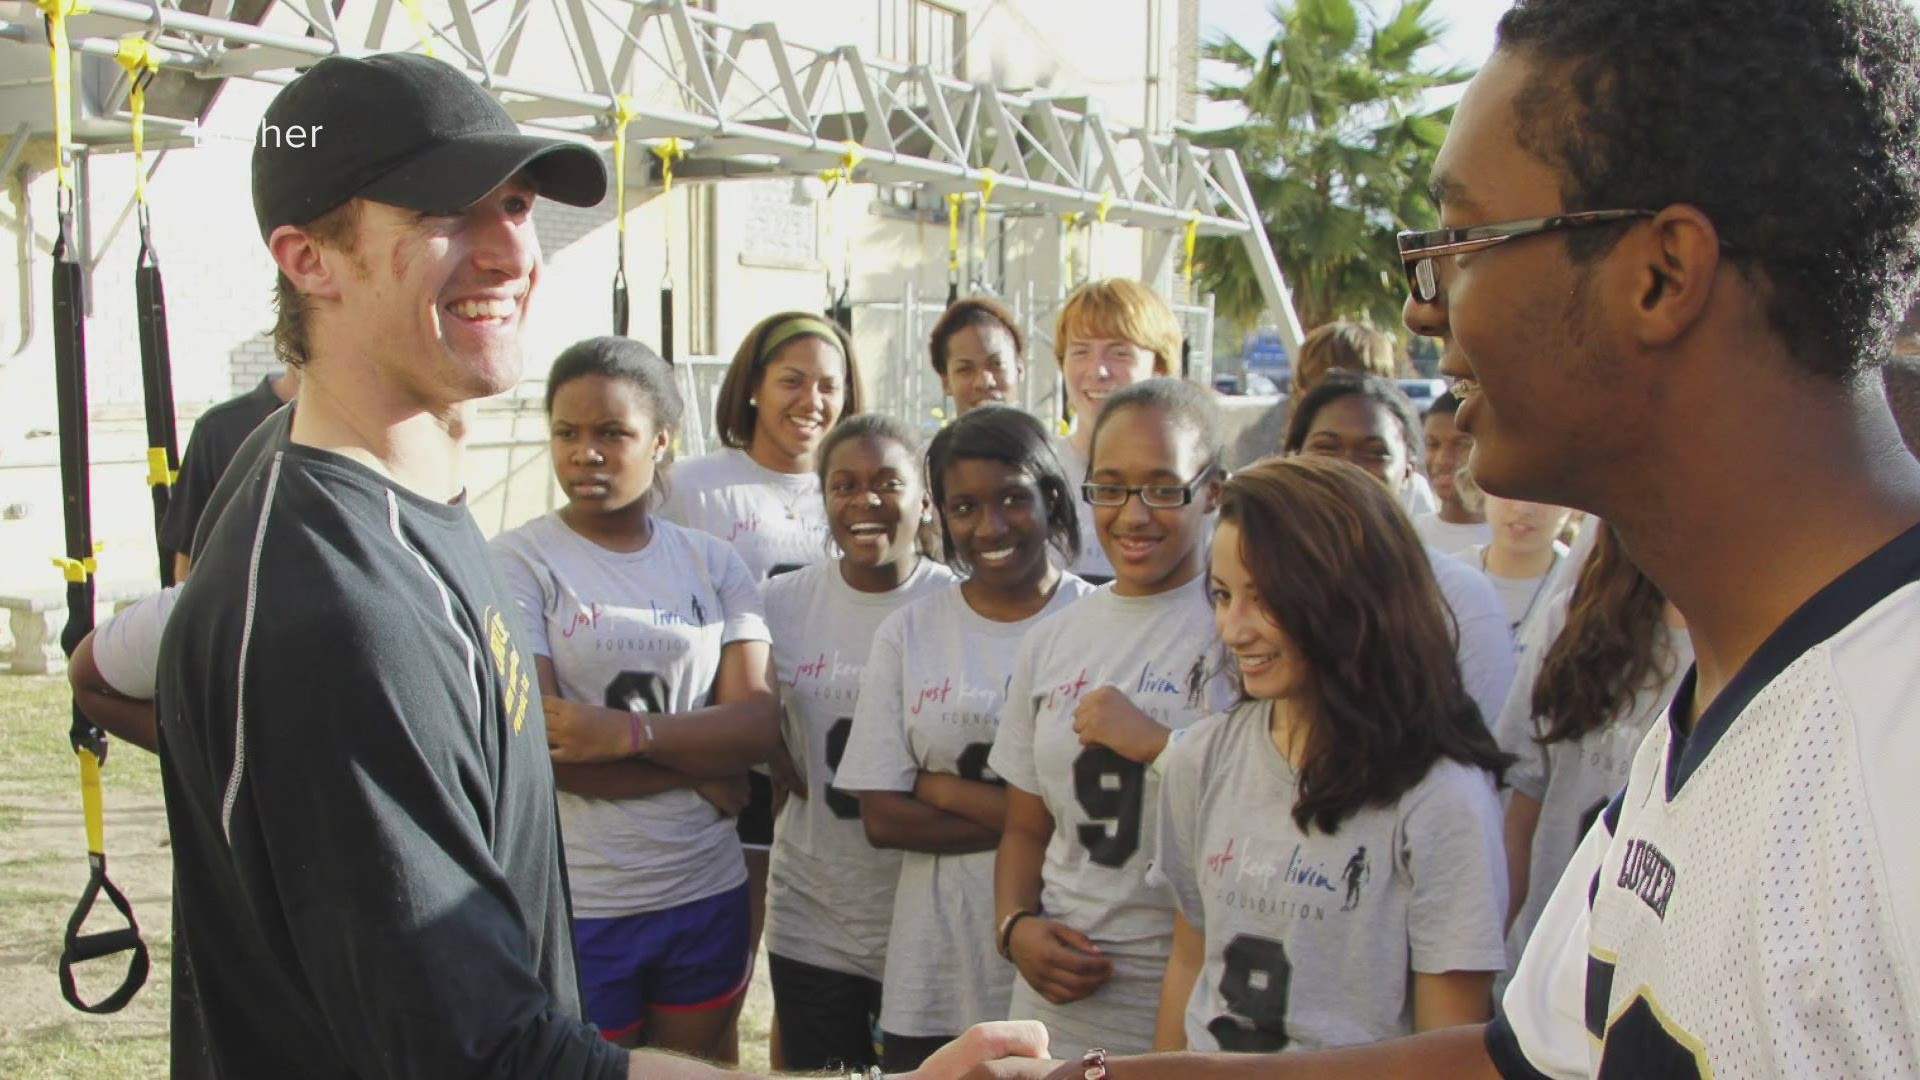 Drew Brees was driving by Lusher and saw cleanup going at the school after Katrina and asked what he could do to help.